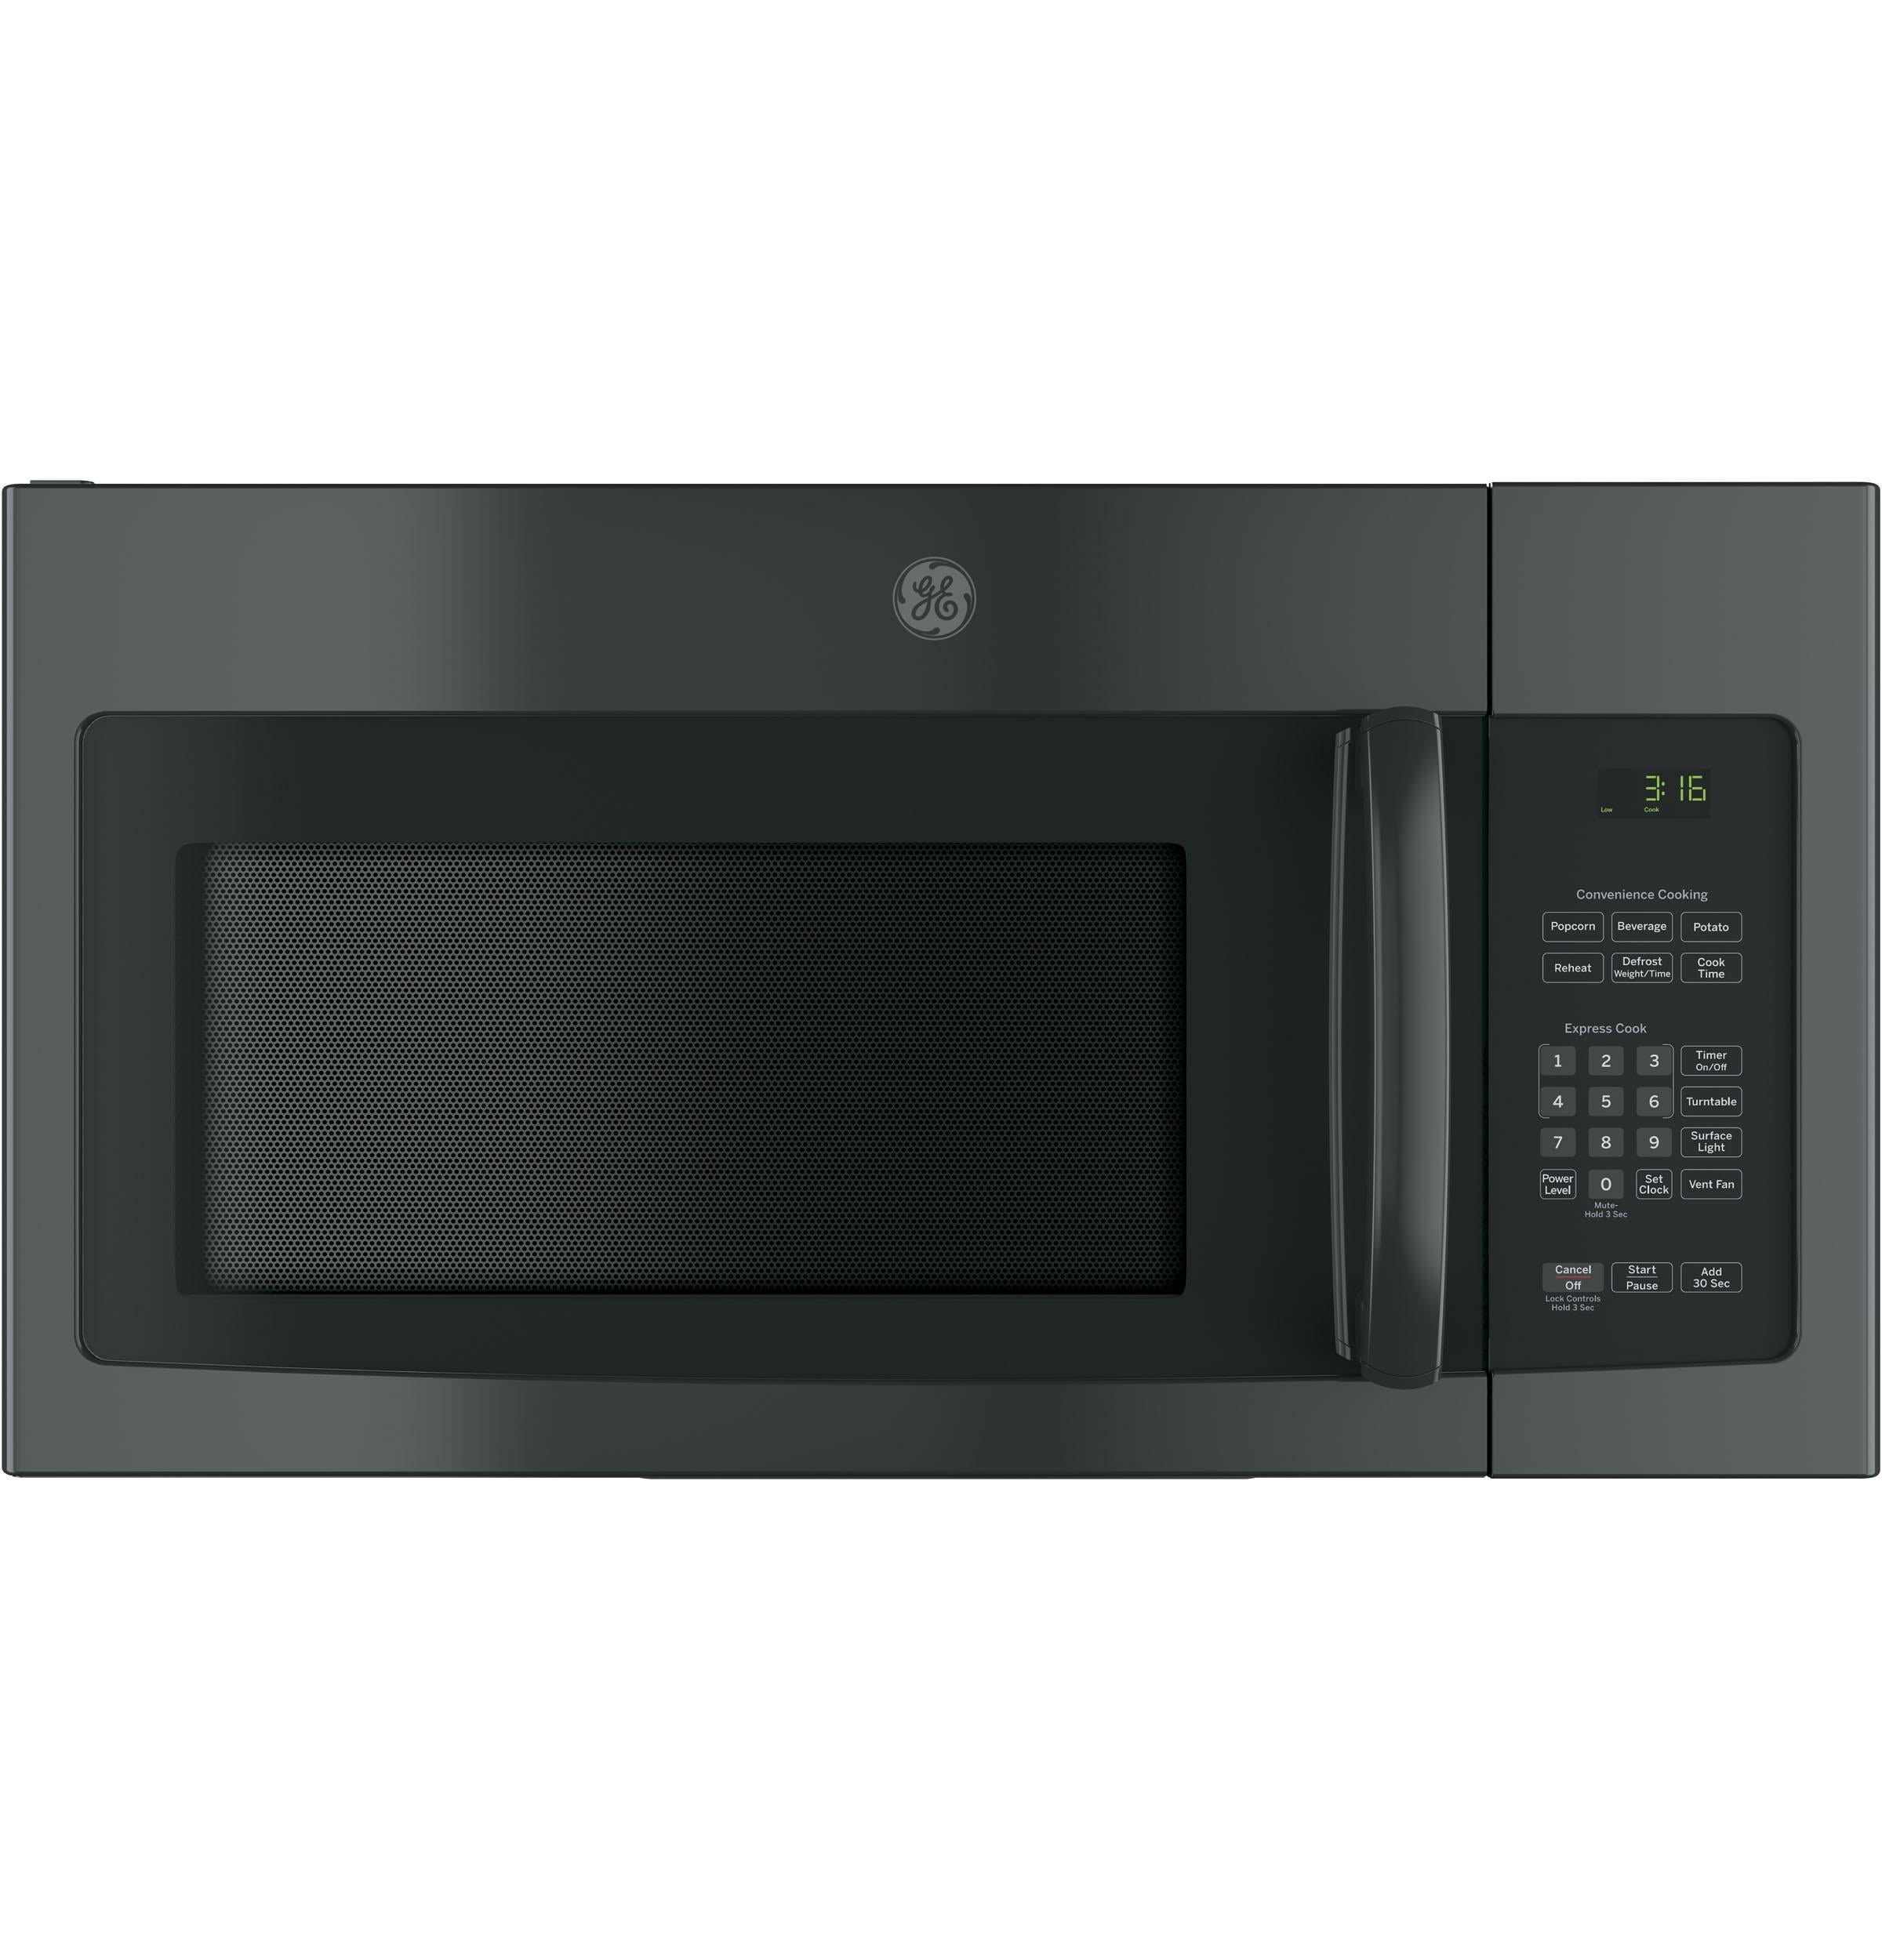 Ge Appliances JNM3163DJBB Ge® 1.6 Cu. Ft. Over-The-Range Microwave Oven With Recirculating Venting